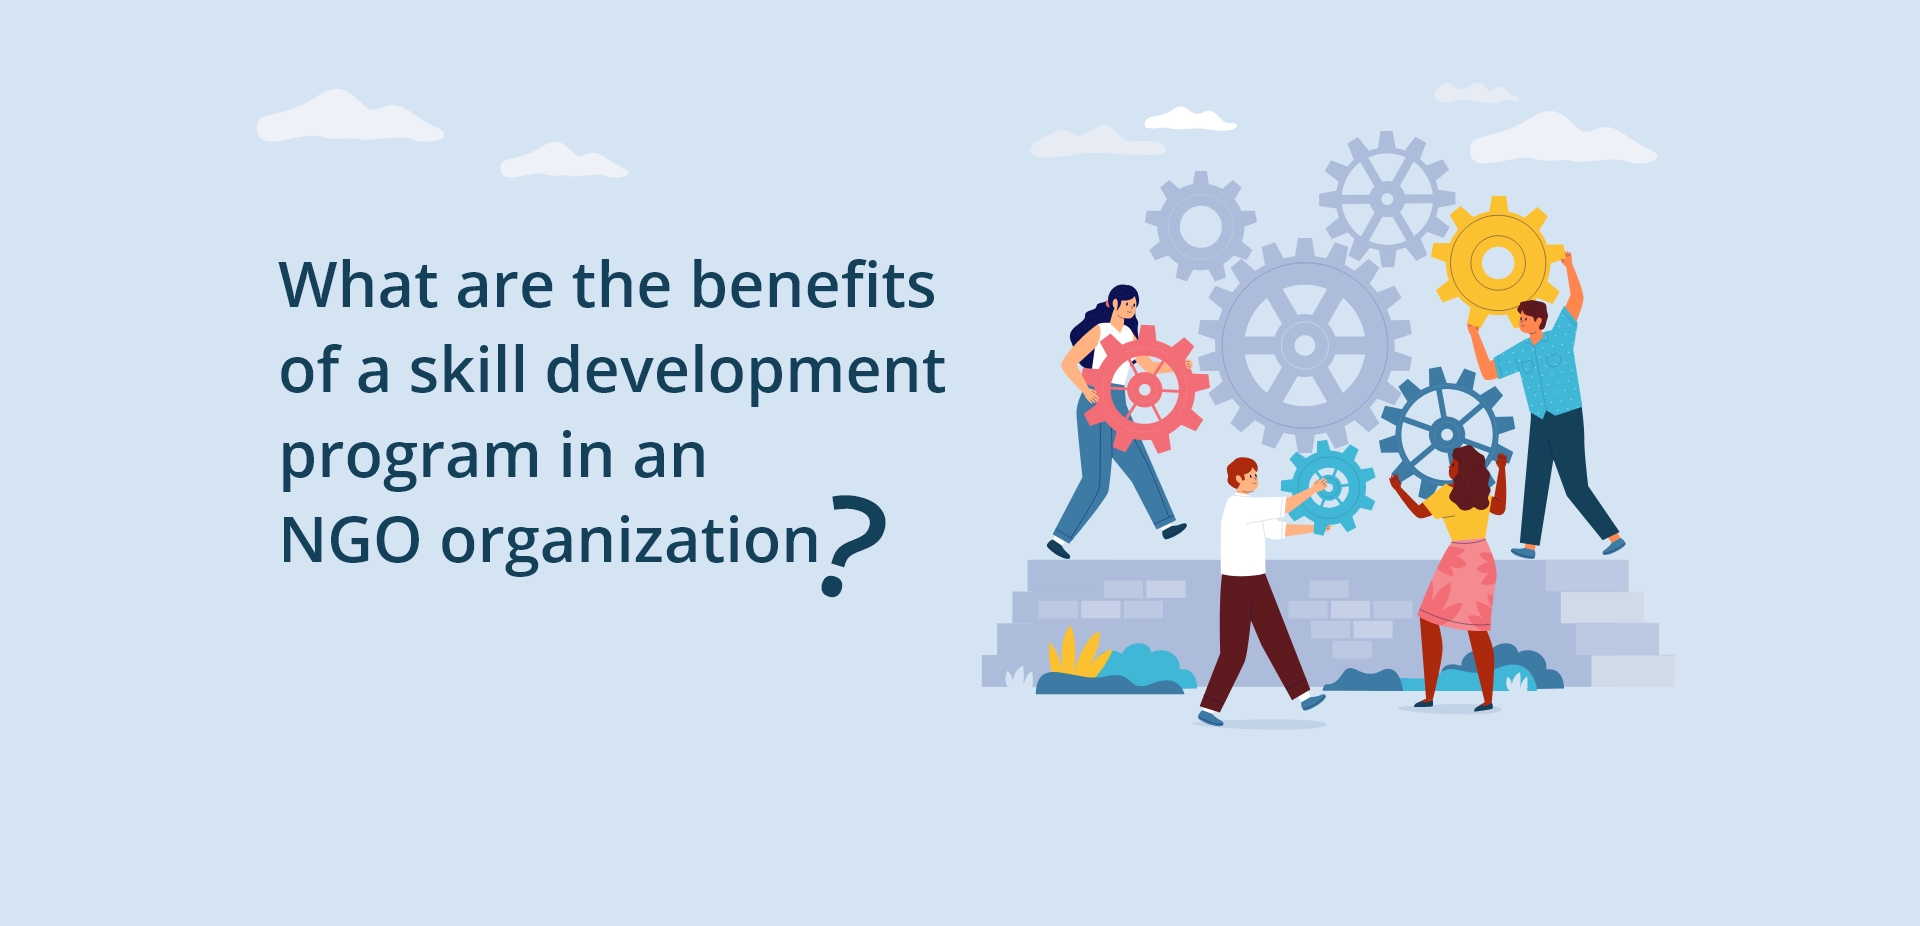 What are the benefits of a skill development program in an NGO organization?